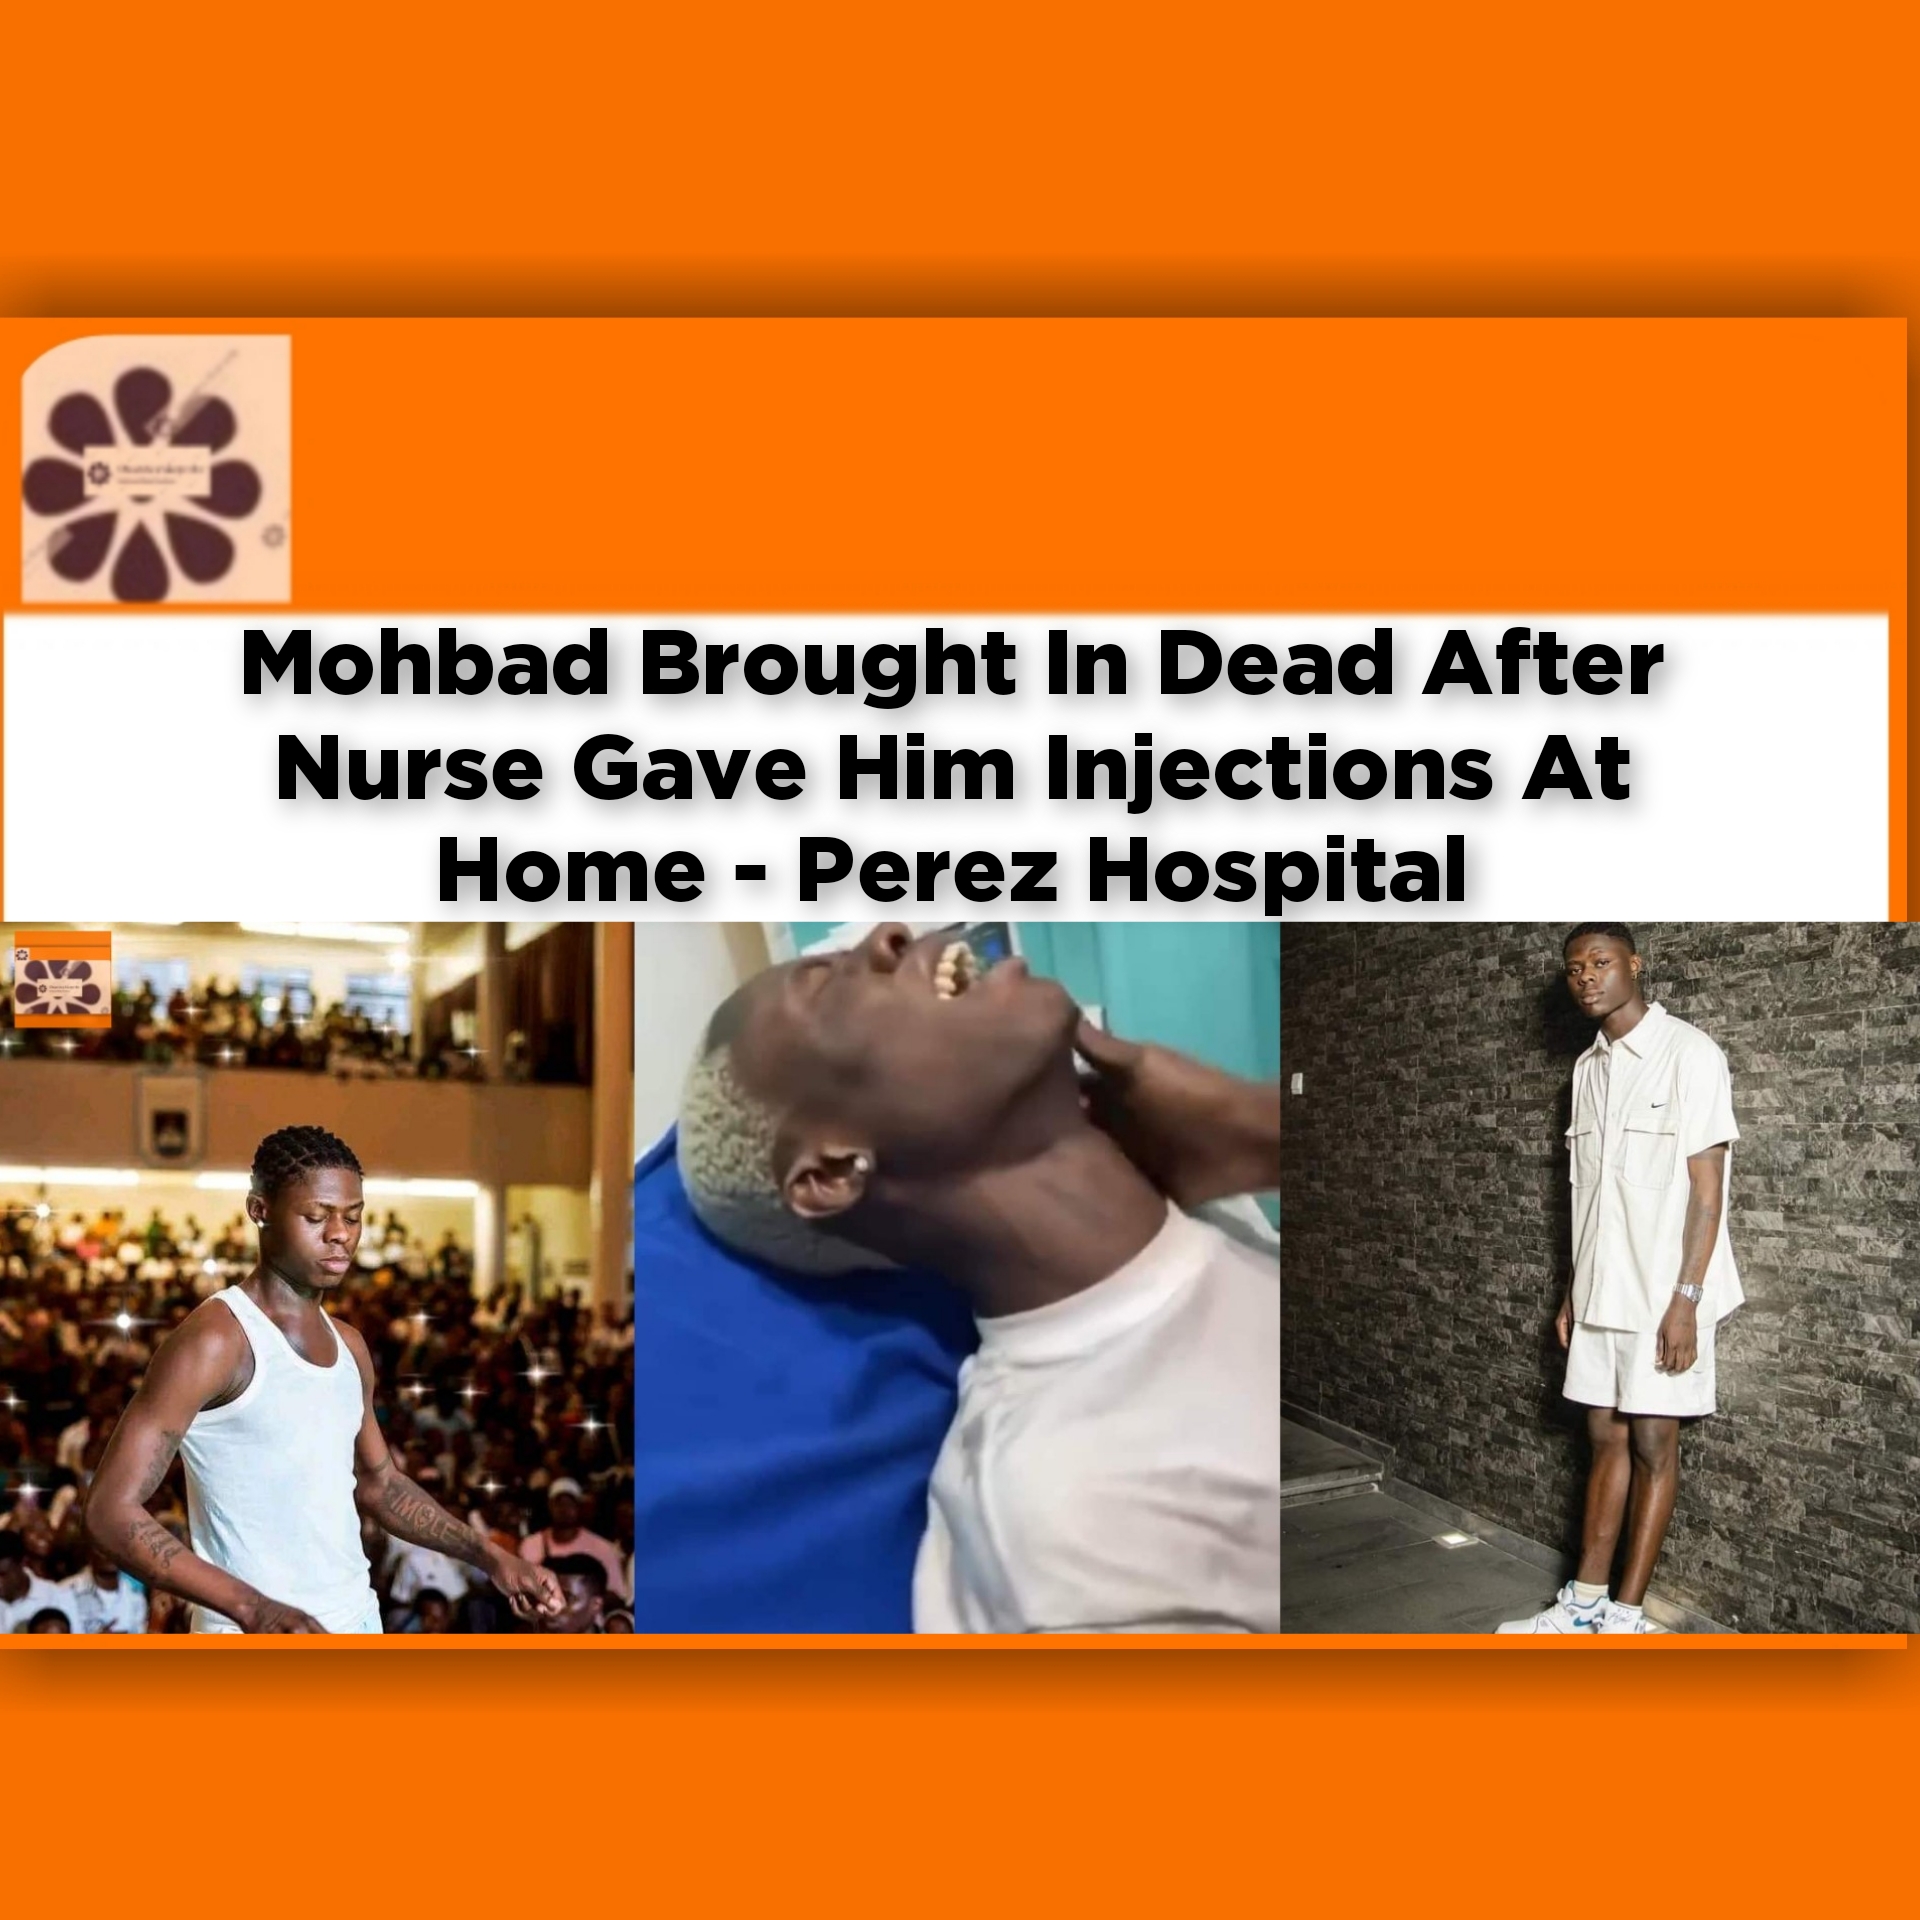 Mohbad Brought In Dead After Nurse Gave Him Injections At Home - Perez Hospital ~ OsazuwaAkonedo Reno Omokri